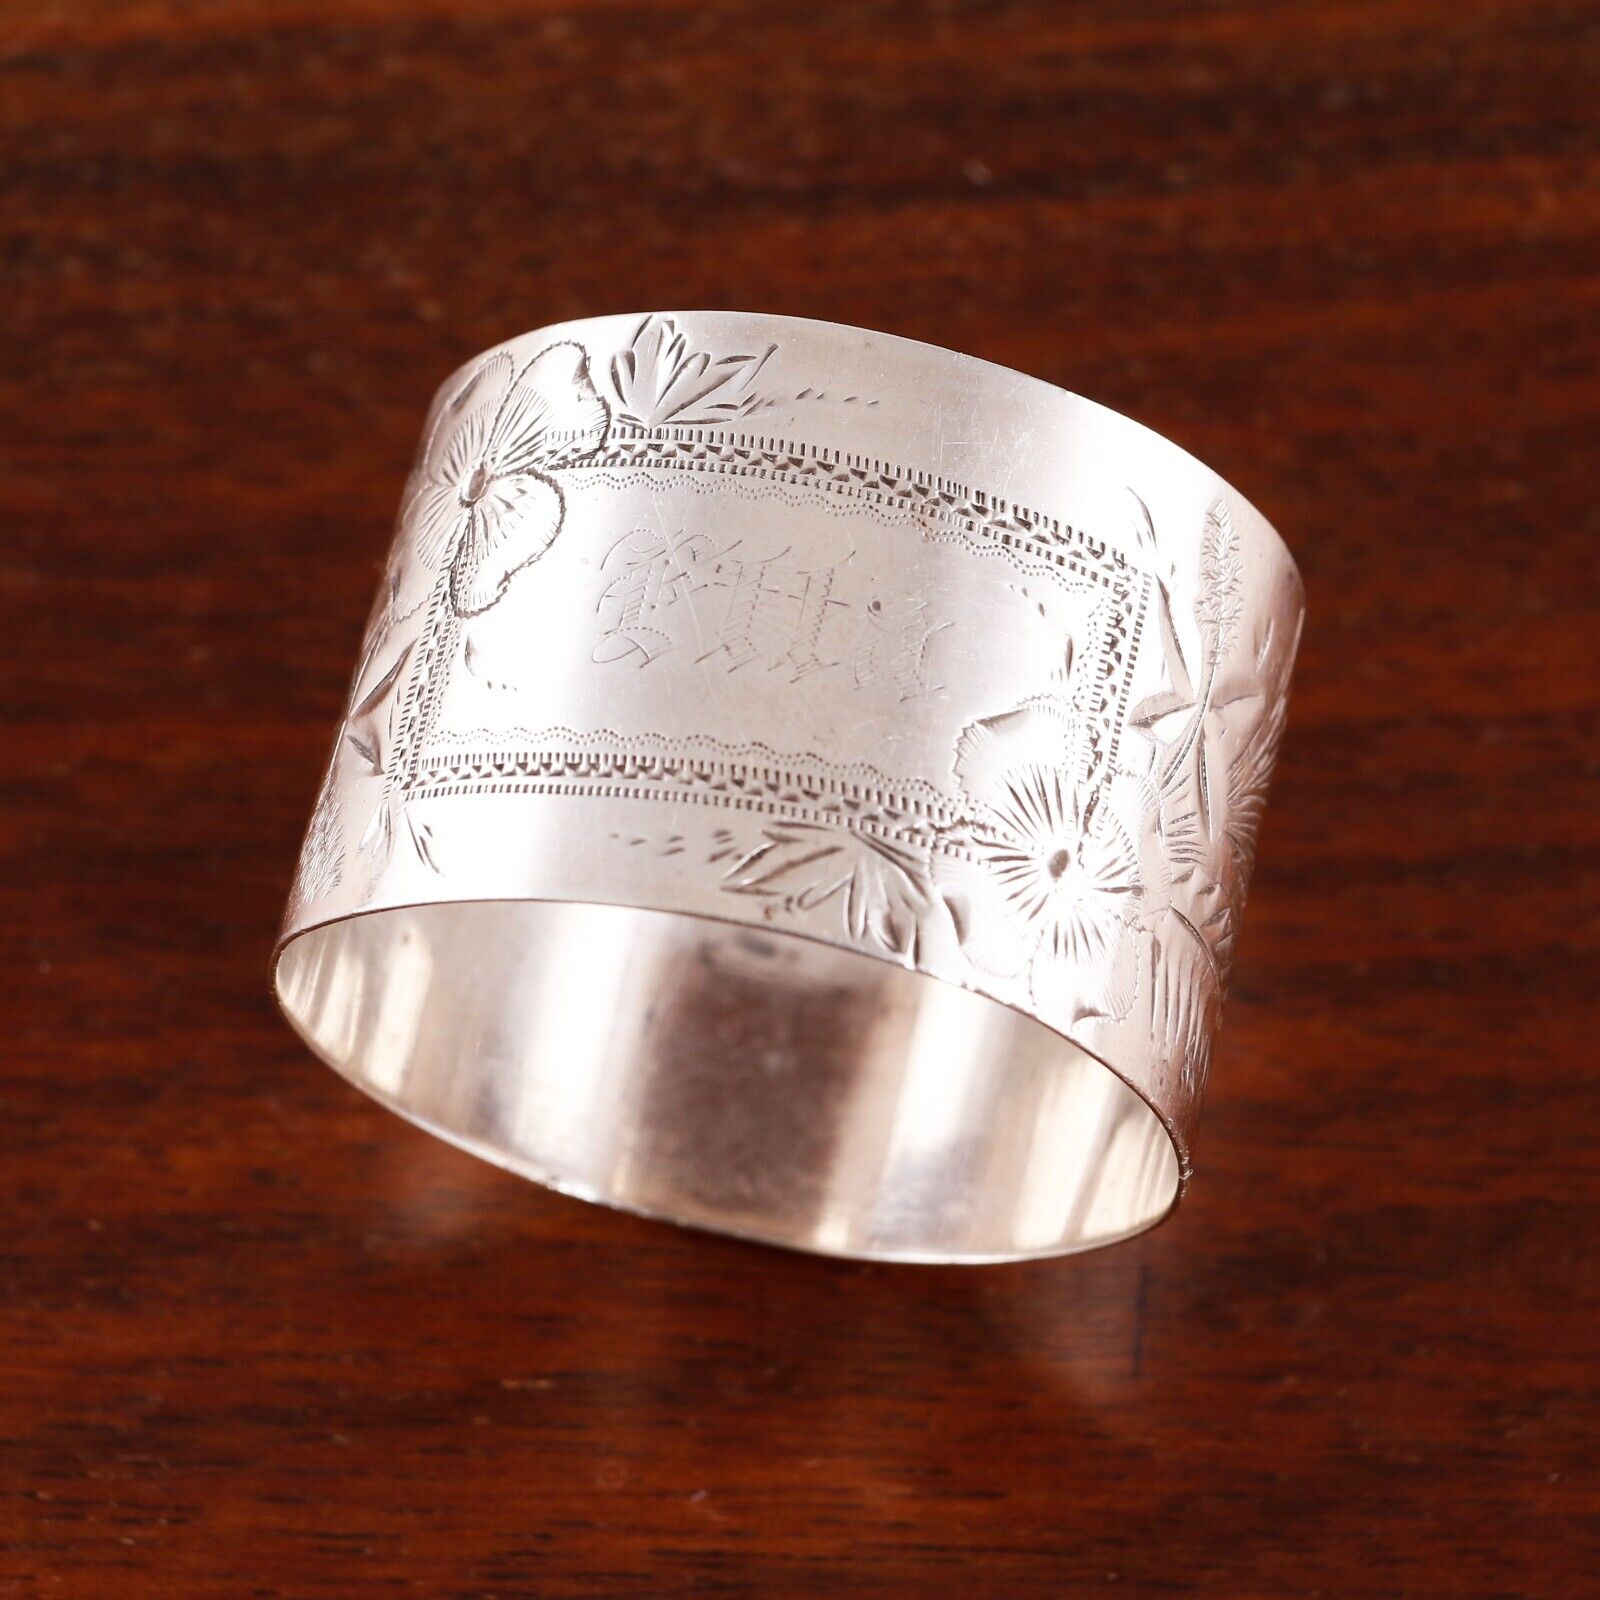 Antique Valuations: N G WOOD AESTHETIC STERLING SILVER NAPKIN RING FLORALS & FOLIATE MONOGRAM ETTA